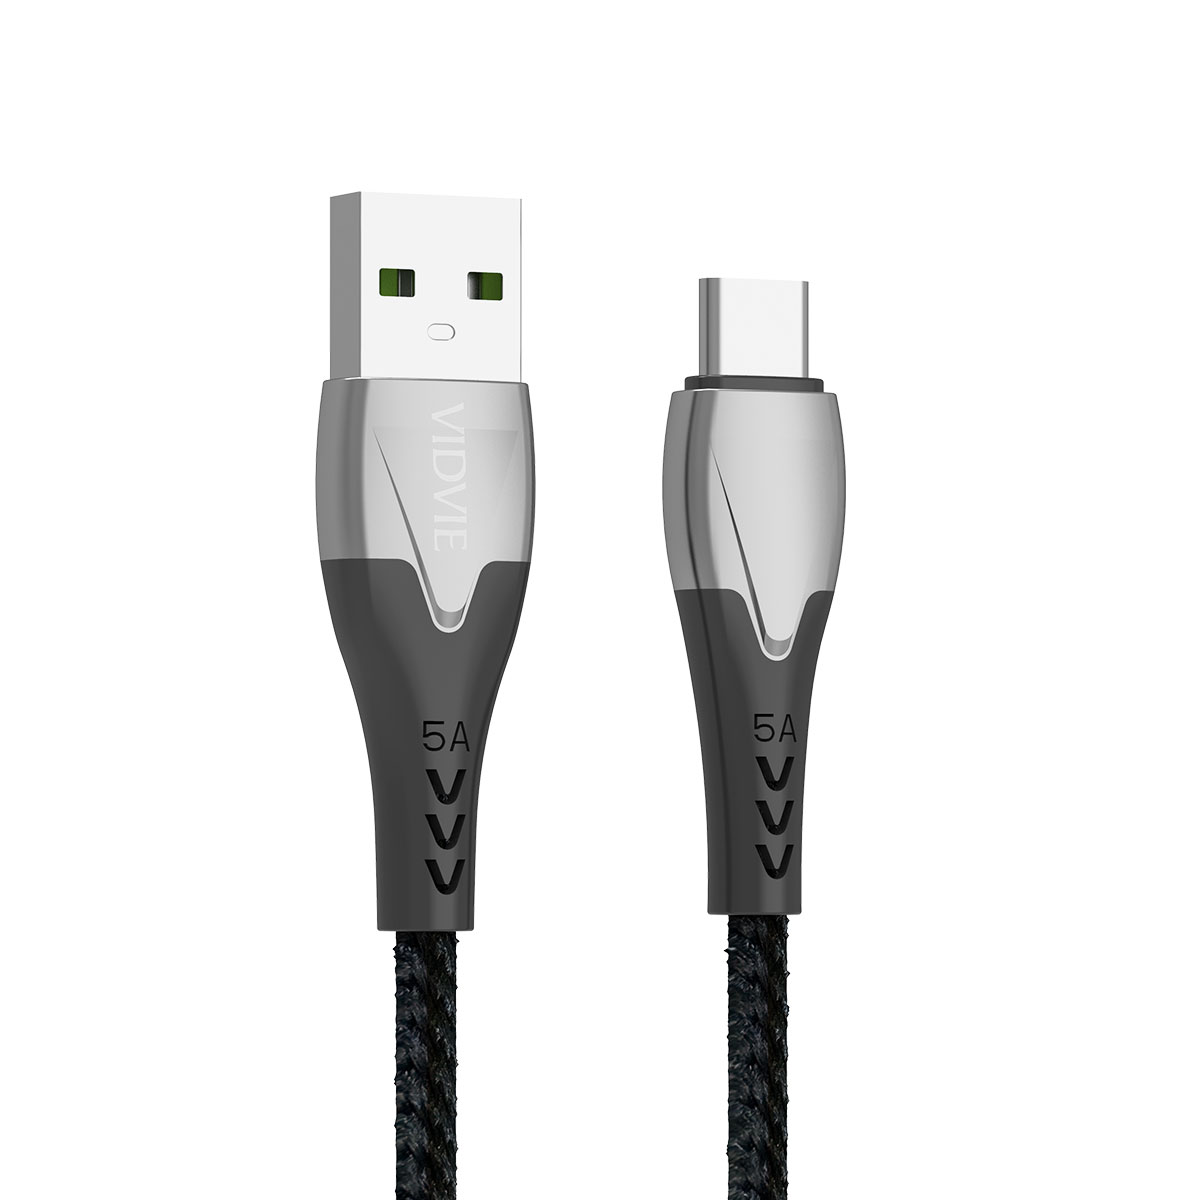 CABLE USB TYPE-C DATA & CHARGE 5A VIDVIE CB461 ,Other Smartphone Acc